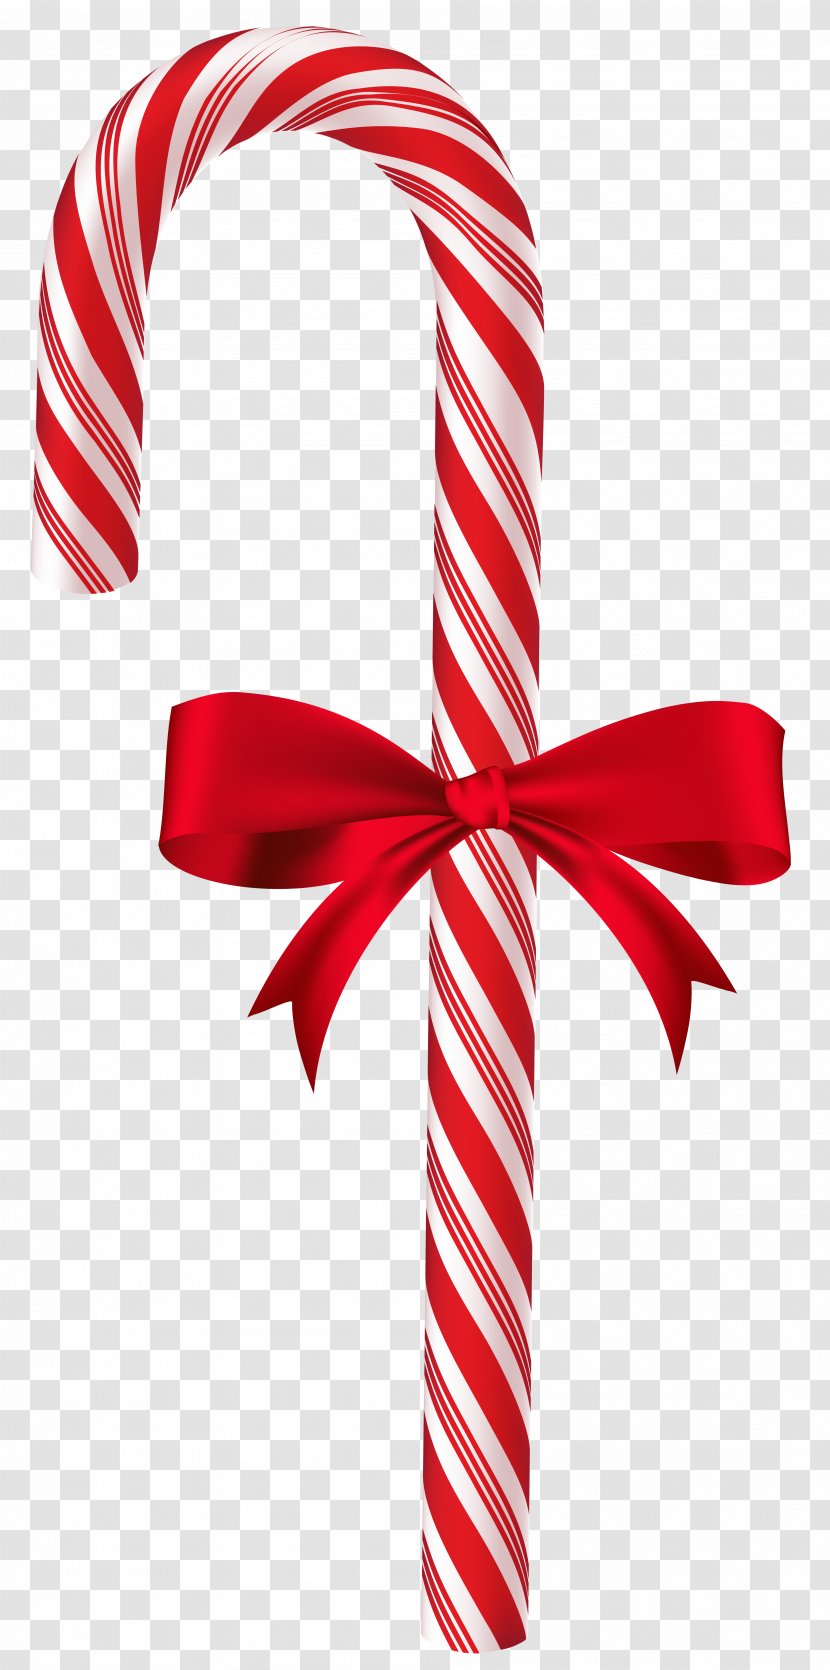 Candy Cane Christmas Clip Art - With Red Bow Image Transparent PNG